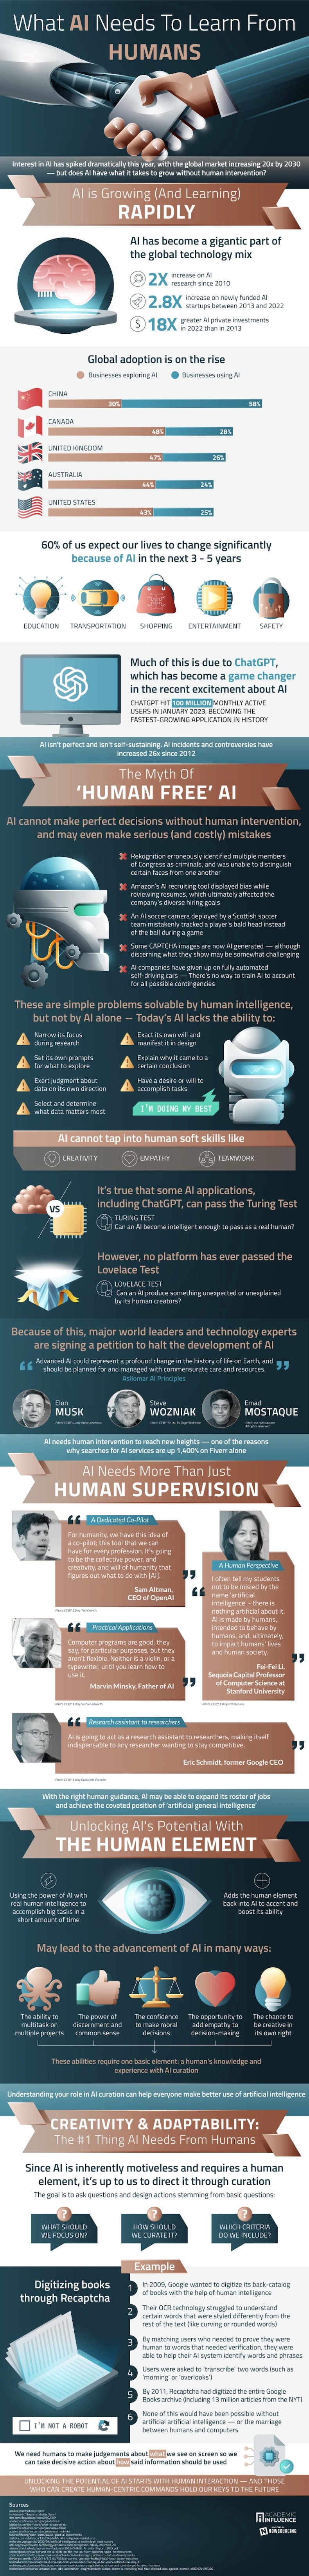 What AI needs to learn from humans infographic